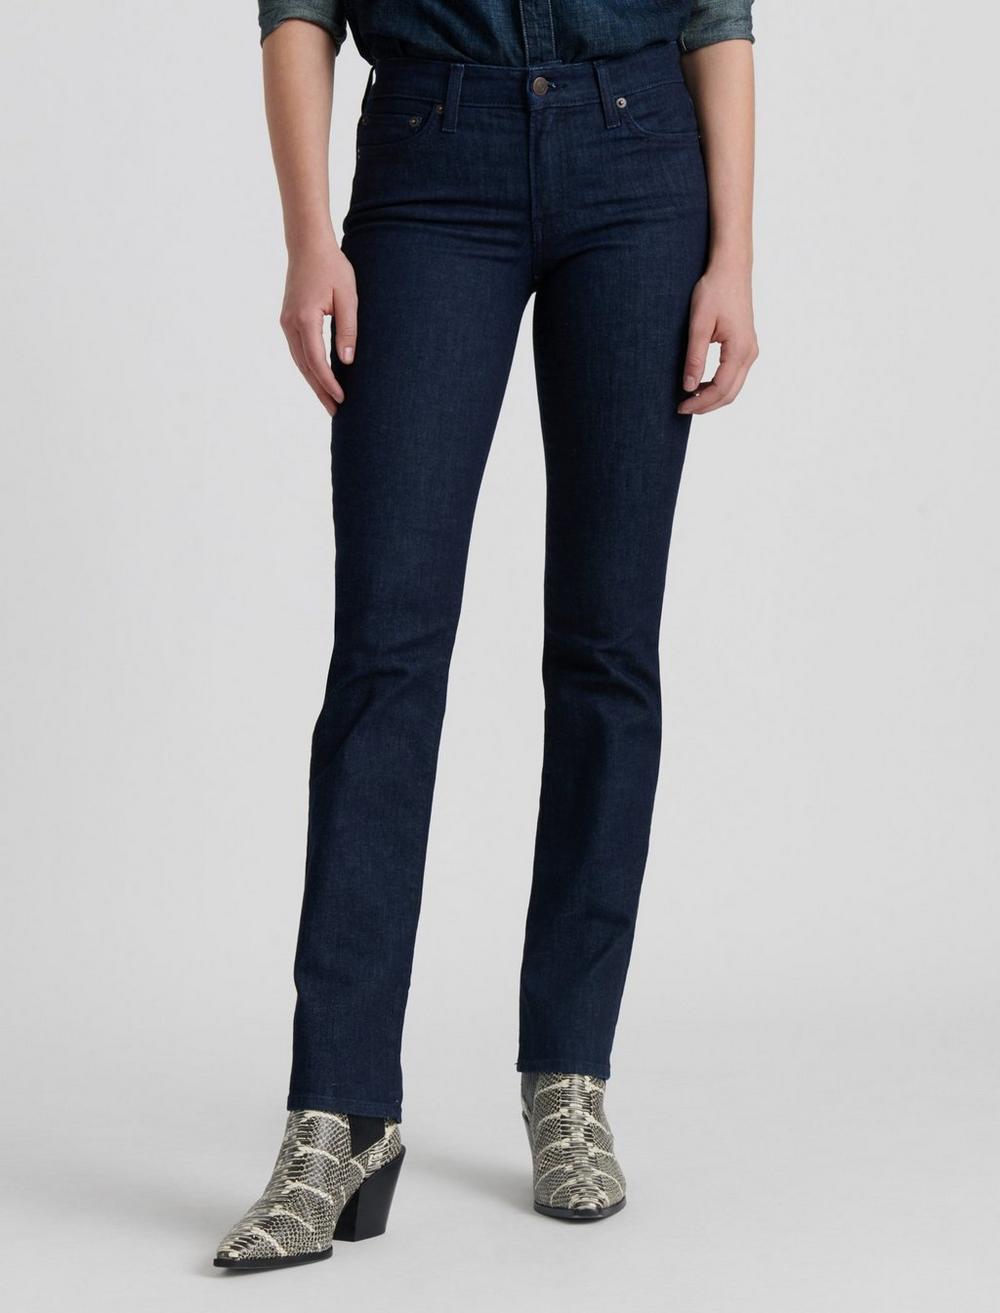 Lucky Brand,Women's Denim Jeans,SWEET'N STRAIGHT,Mid-Rise,Super Stretch